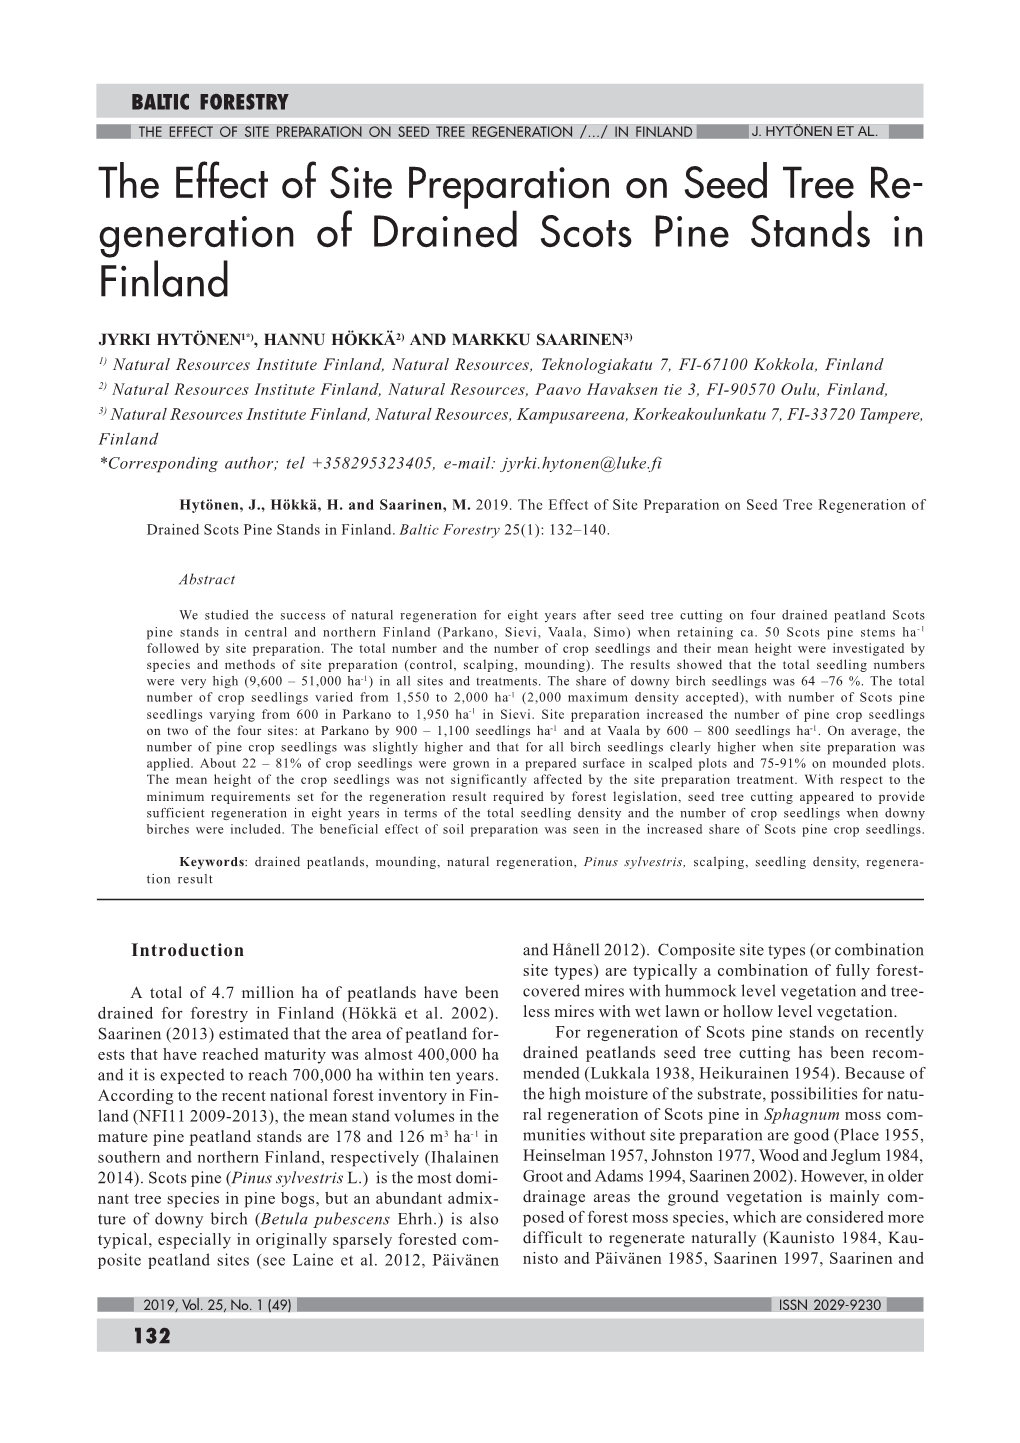 The Effect of Site Preparation on Seed Tree Re- Generation of Drained Scots Pine Stands in Finland